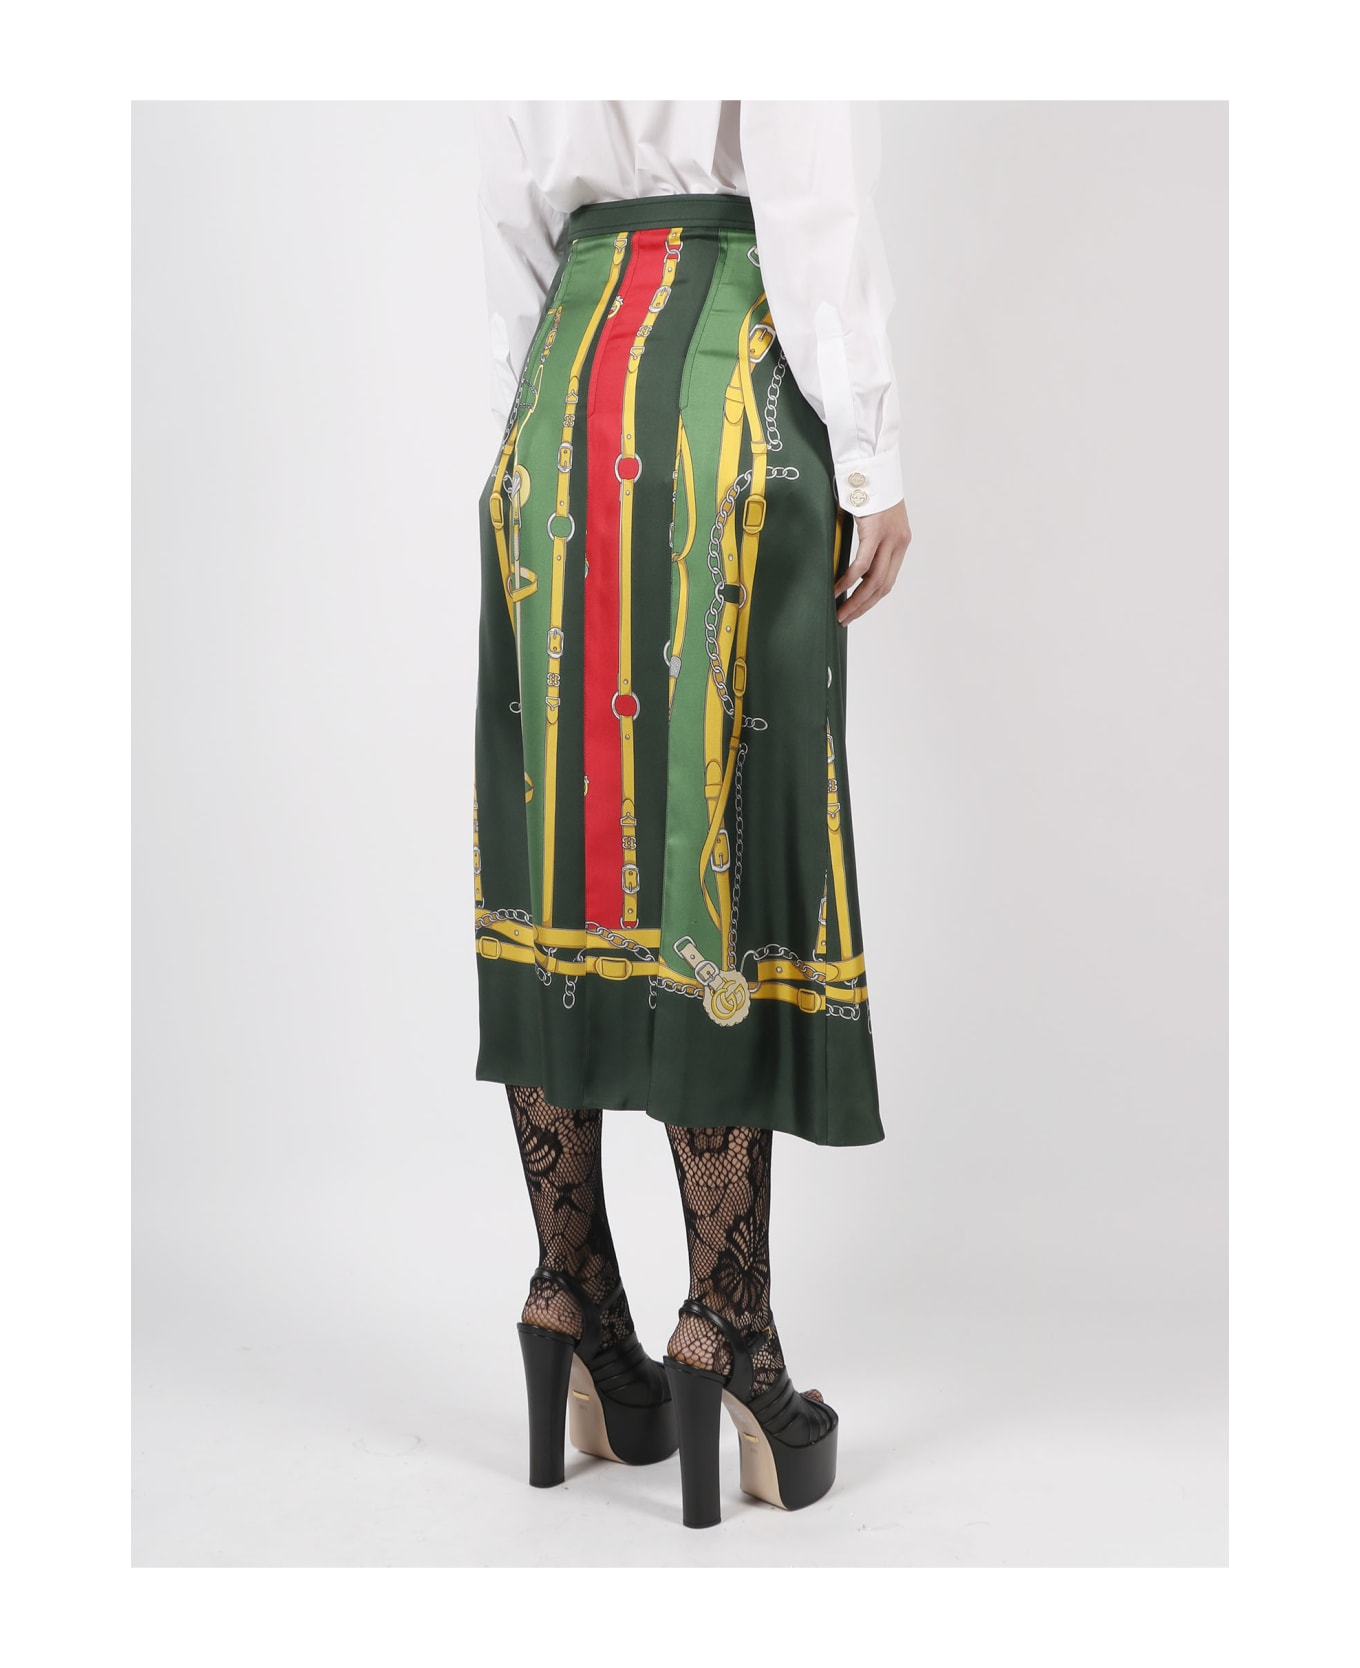 Gucci Harness And Double G Silk Skirt - Green